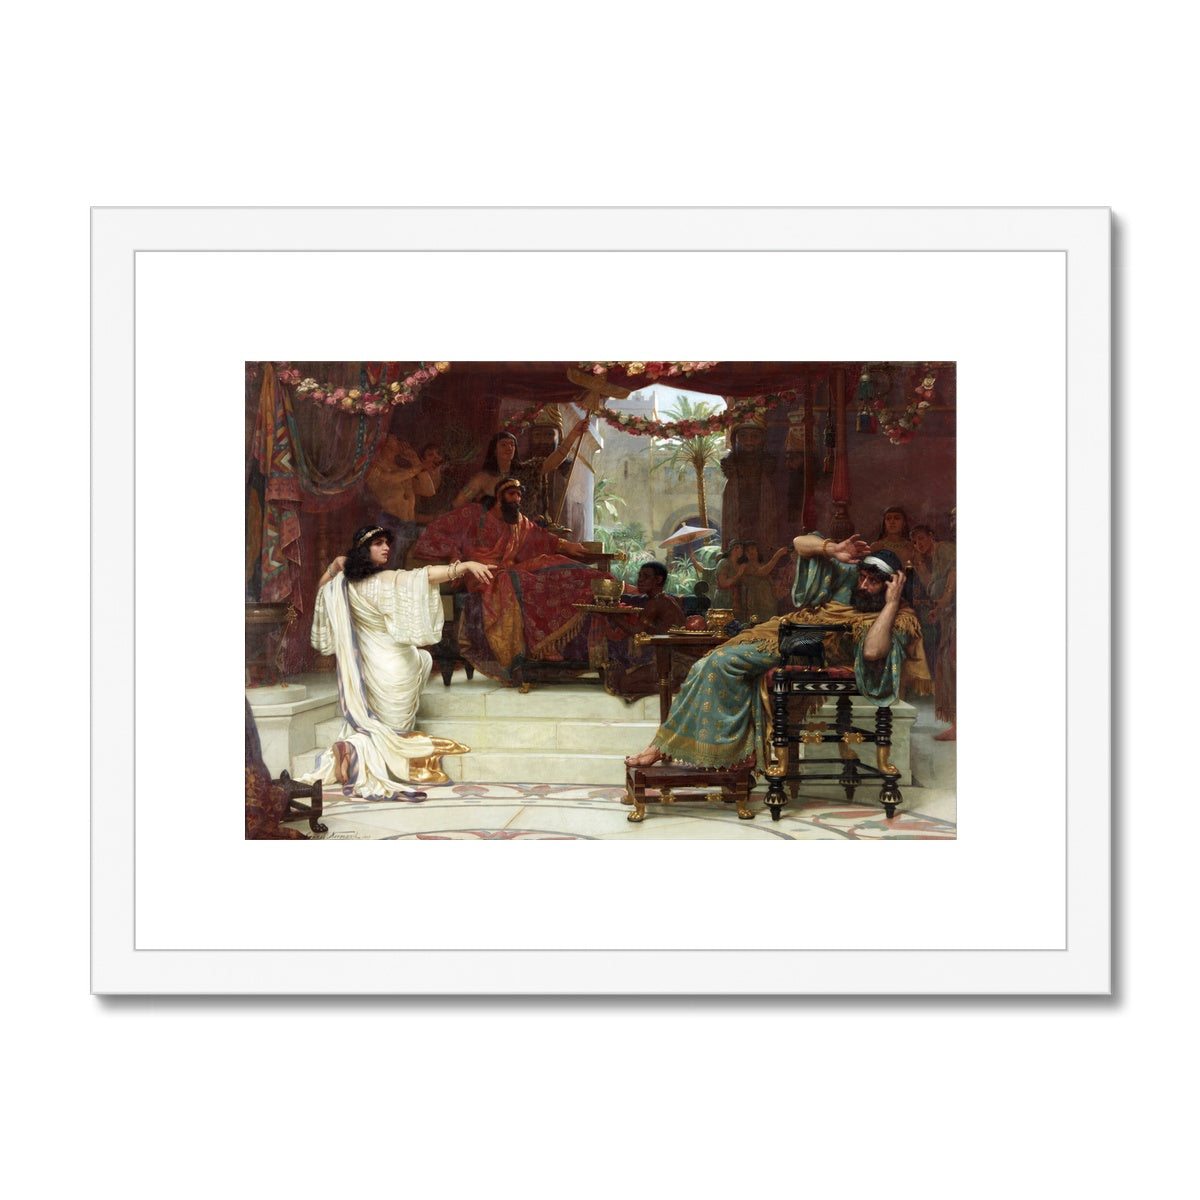 Fine Art Print Framed & Mounted - Esther Denouncing Haman to King Ahasuerus by Ernest Normand